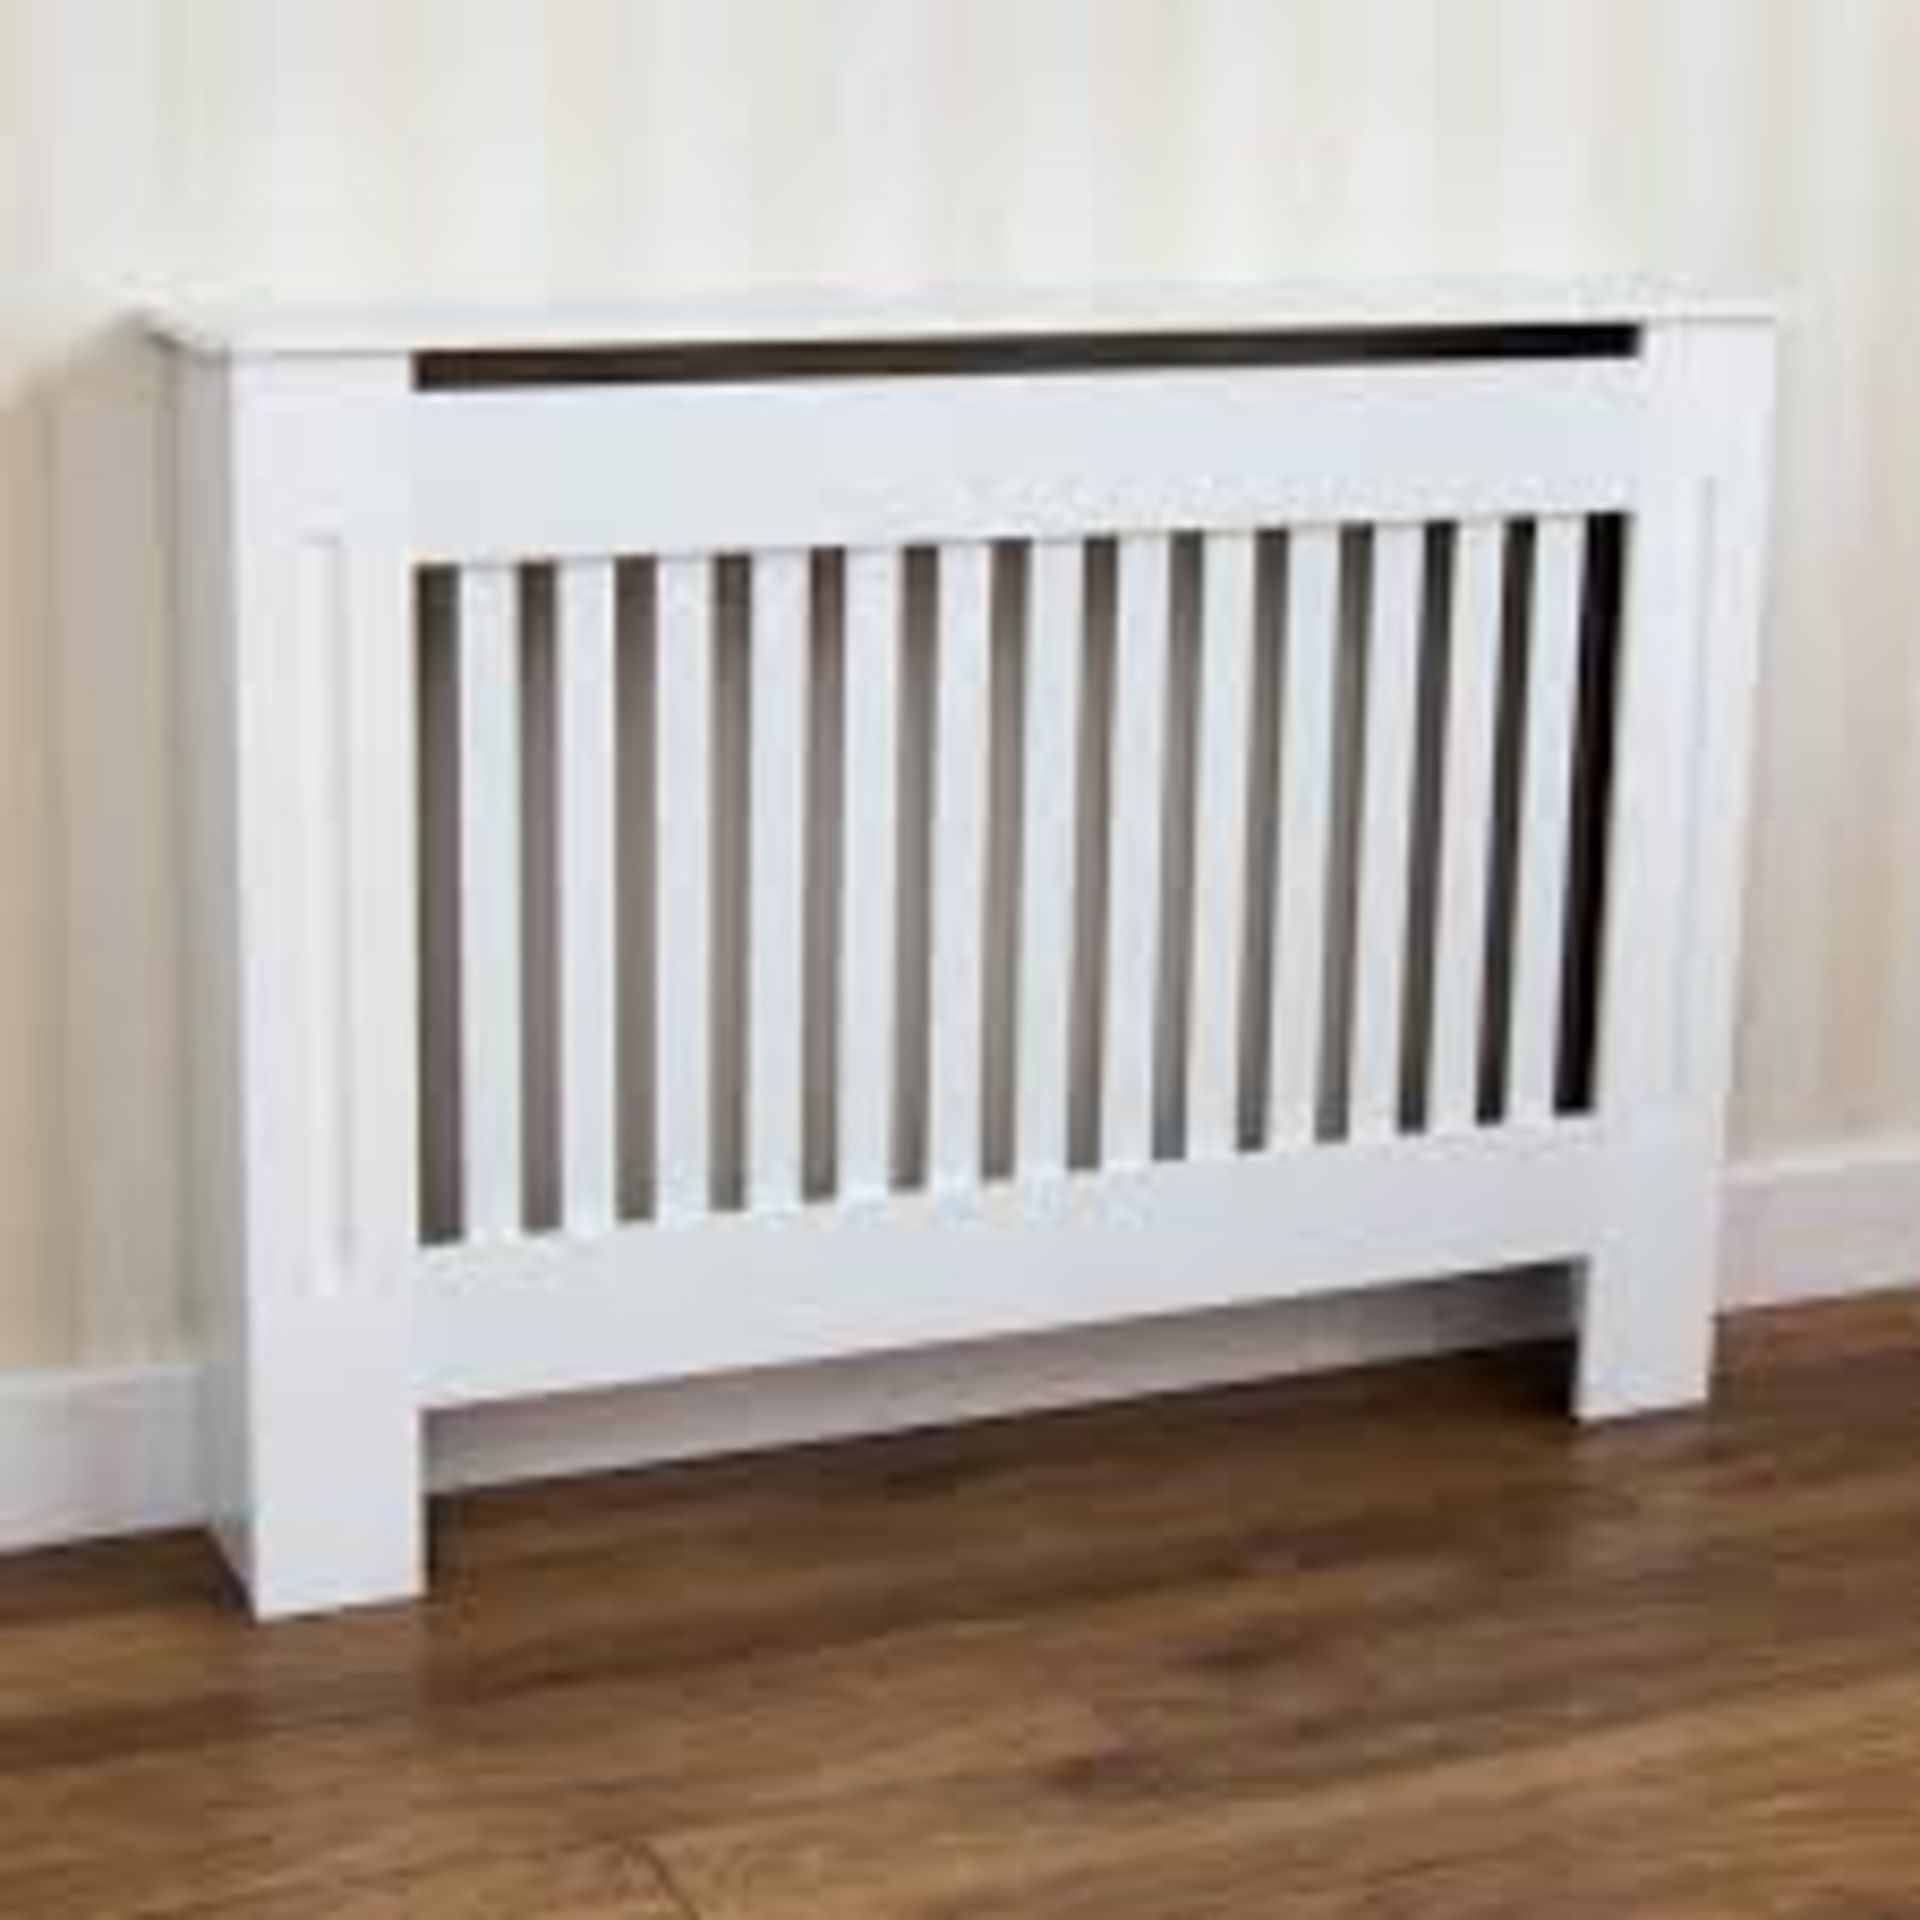 Boxed Veda Design Chealsea Radiator Cover RRP £50 (17893) (Pictures are for illustration purposes